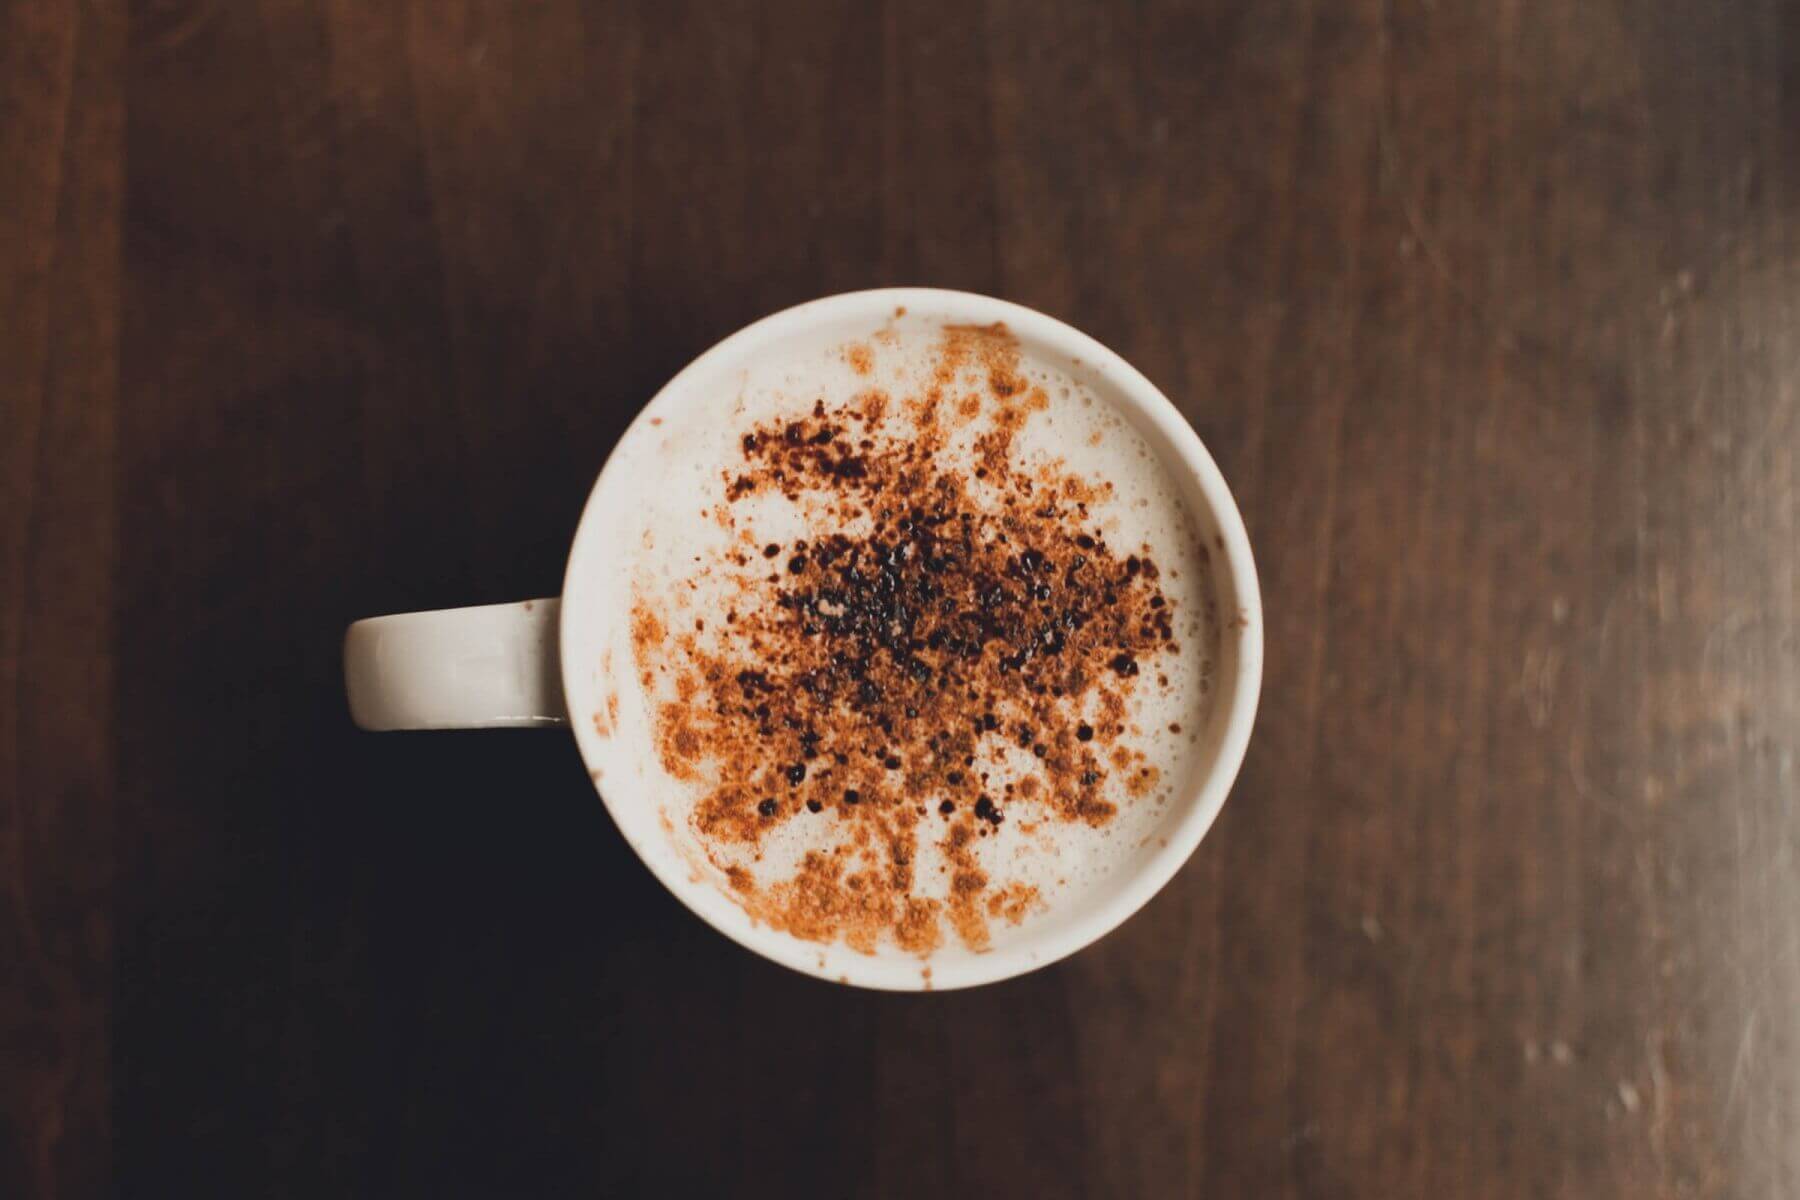 A creamy almond milk cappuccino sprinkled with cinnamon and chocolate.